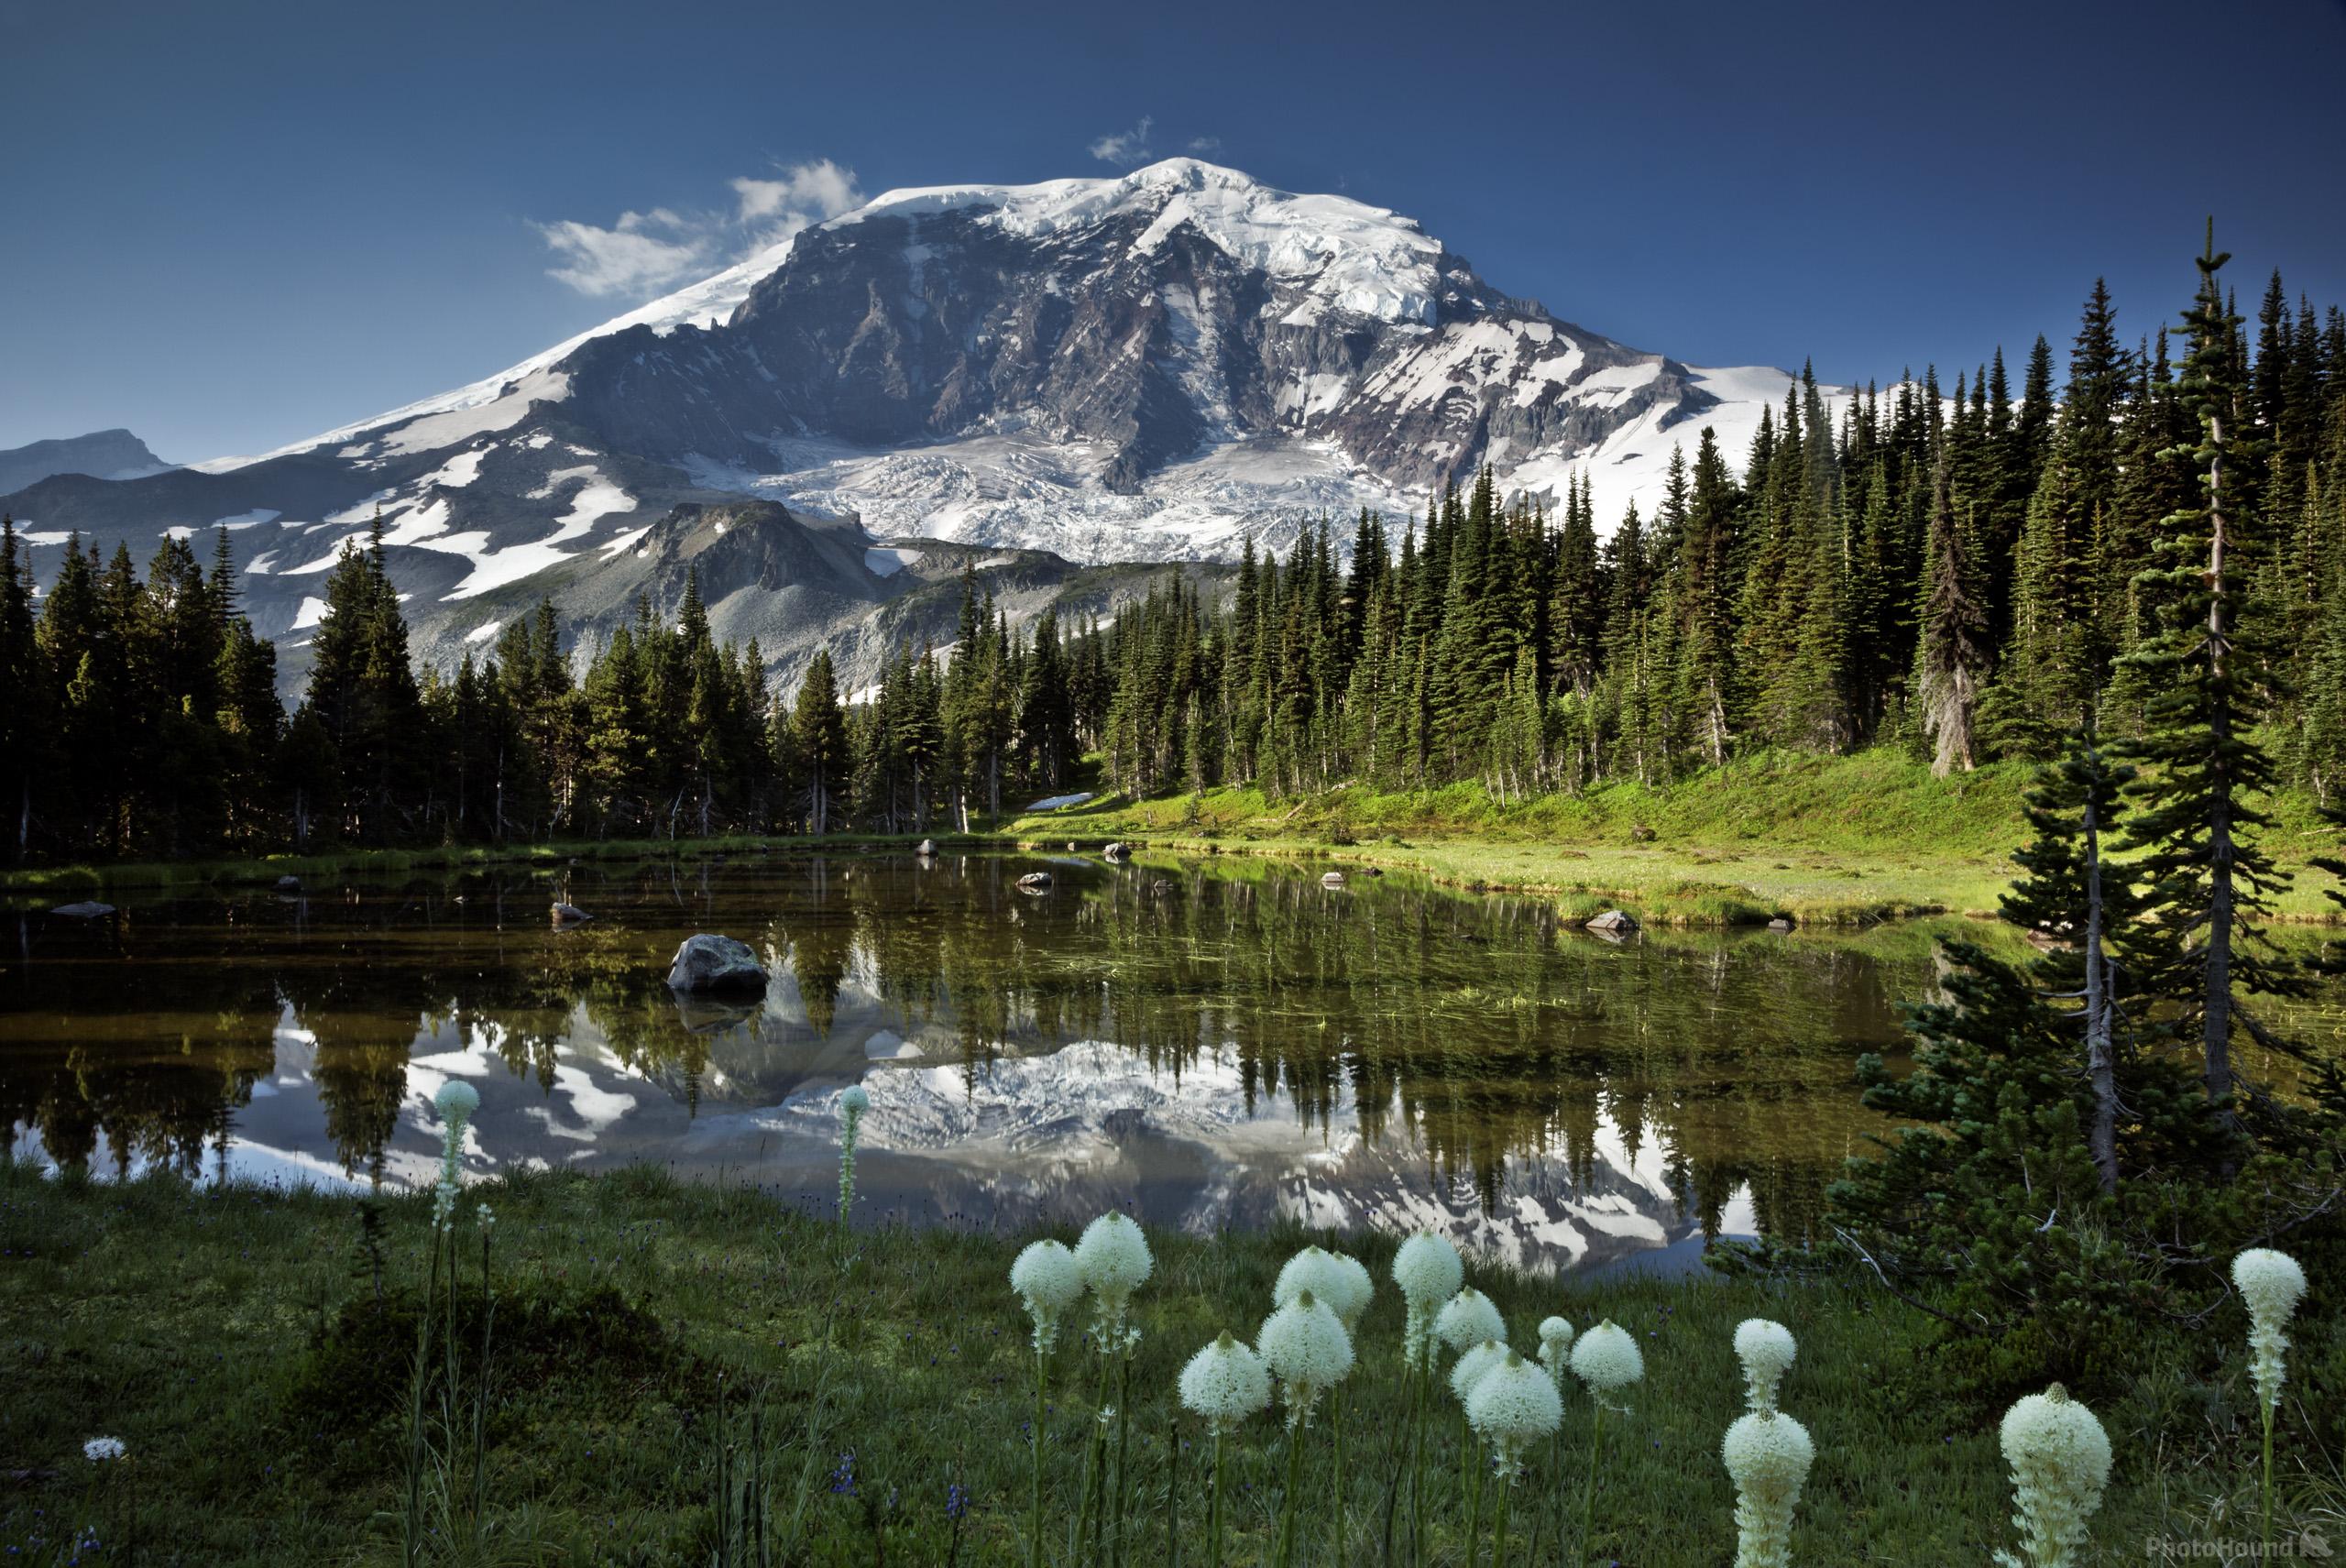 Image of Moraine Park Tarn, Mount Rainier National Park by T. Kirkendall and V. Spring